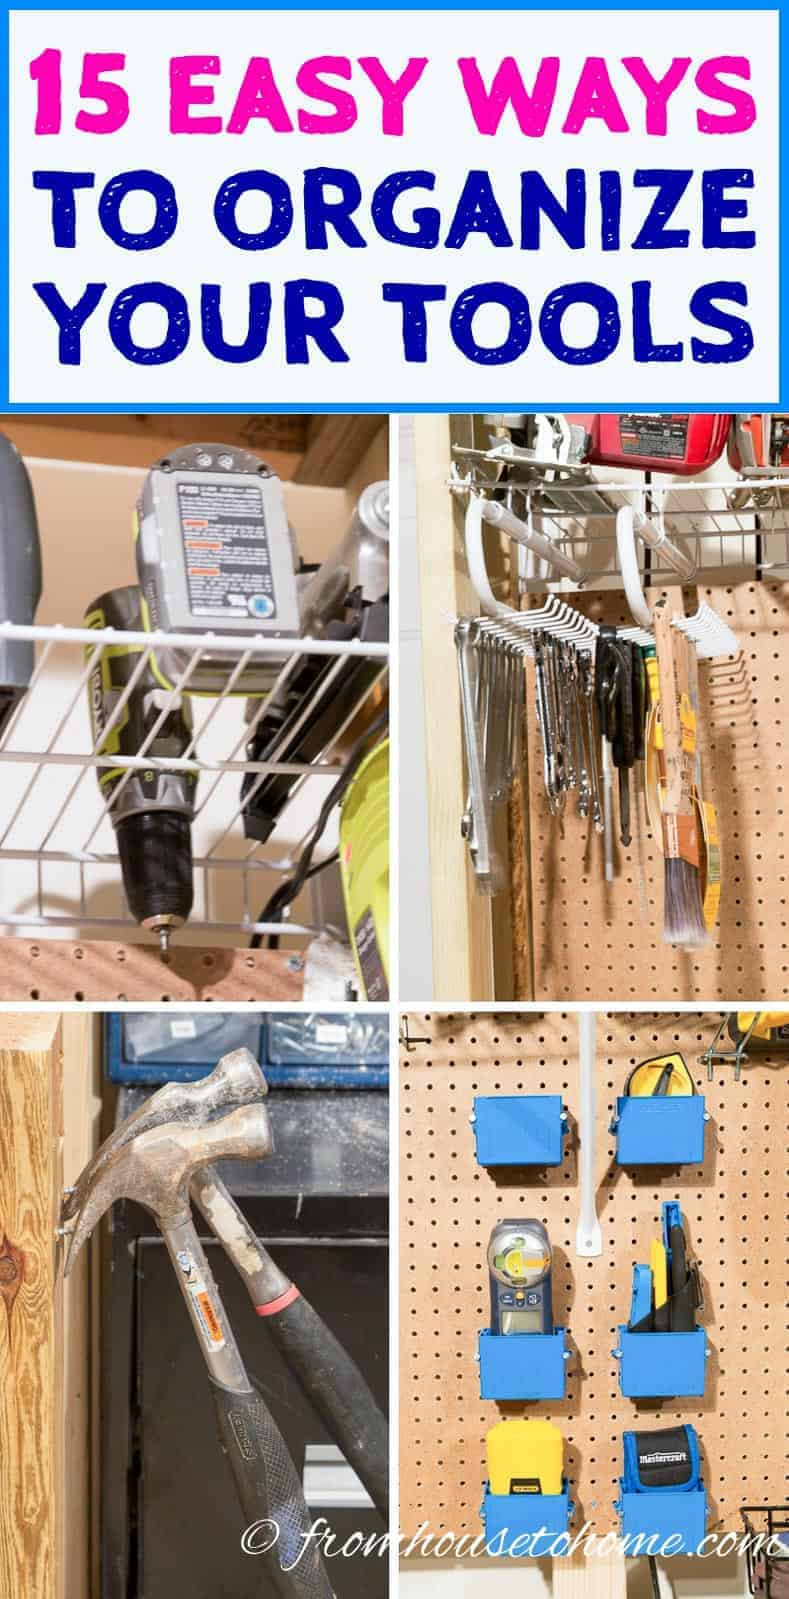 Organize Tools In Garage
 15 Clever Ways to Organize Tools So You Can Find Them